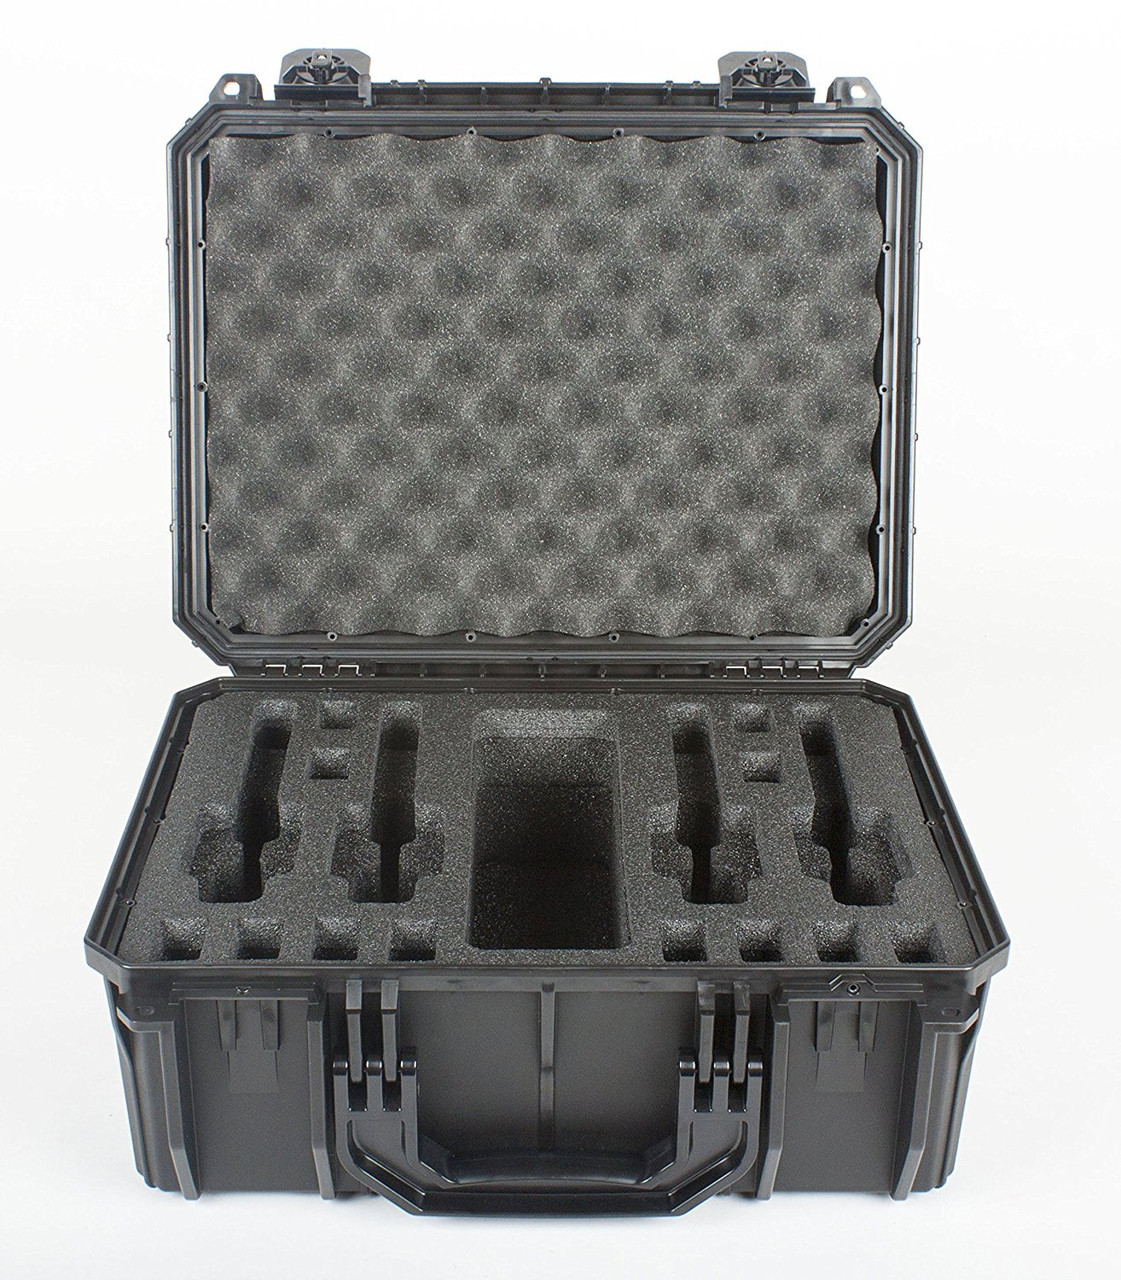 Seahorse-SE-430-Small-Hard-Protective-Waterproof-Shipping-Cases -Containers-Boxes